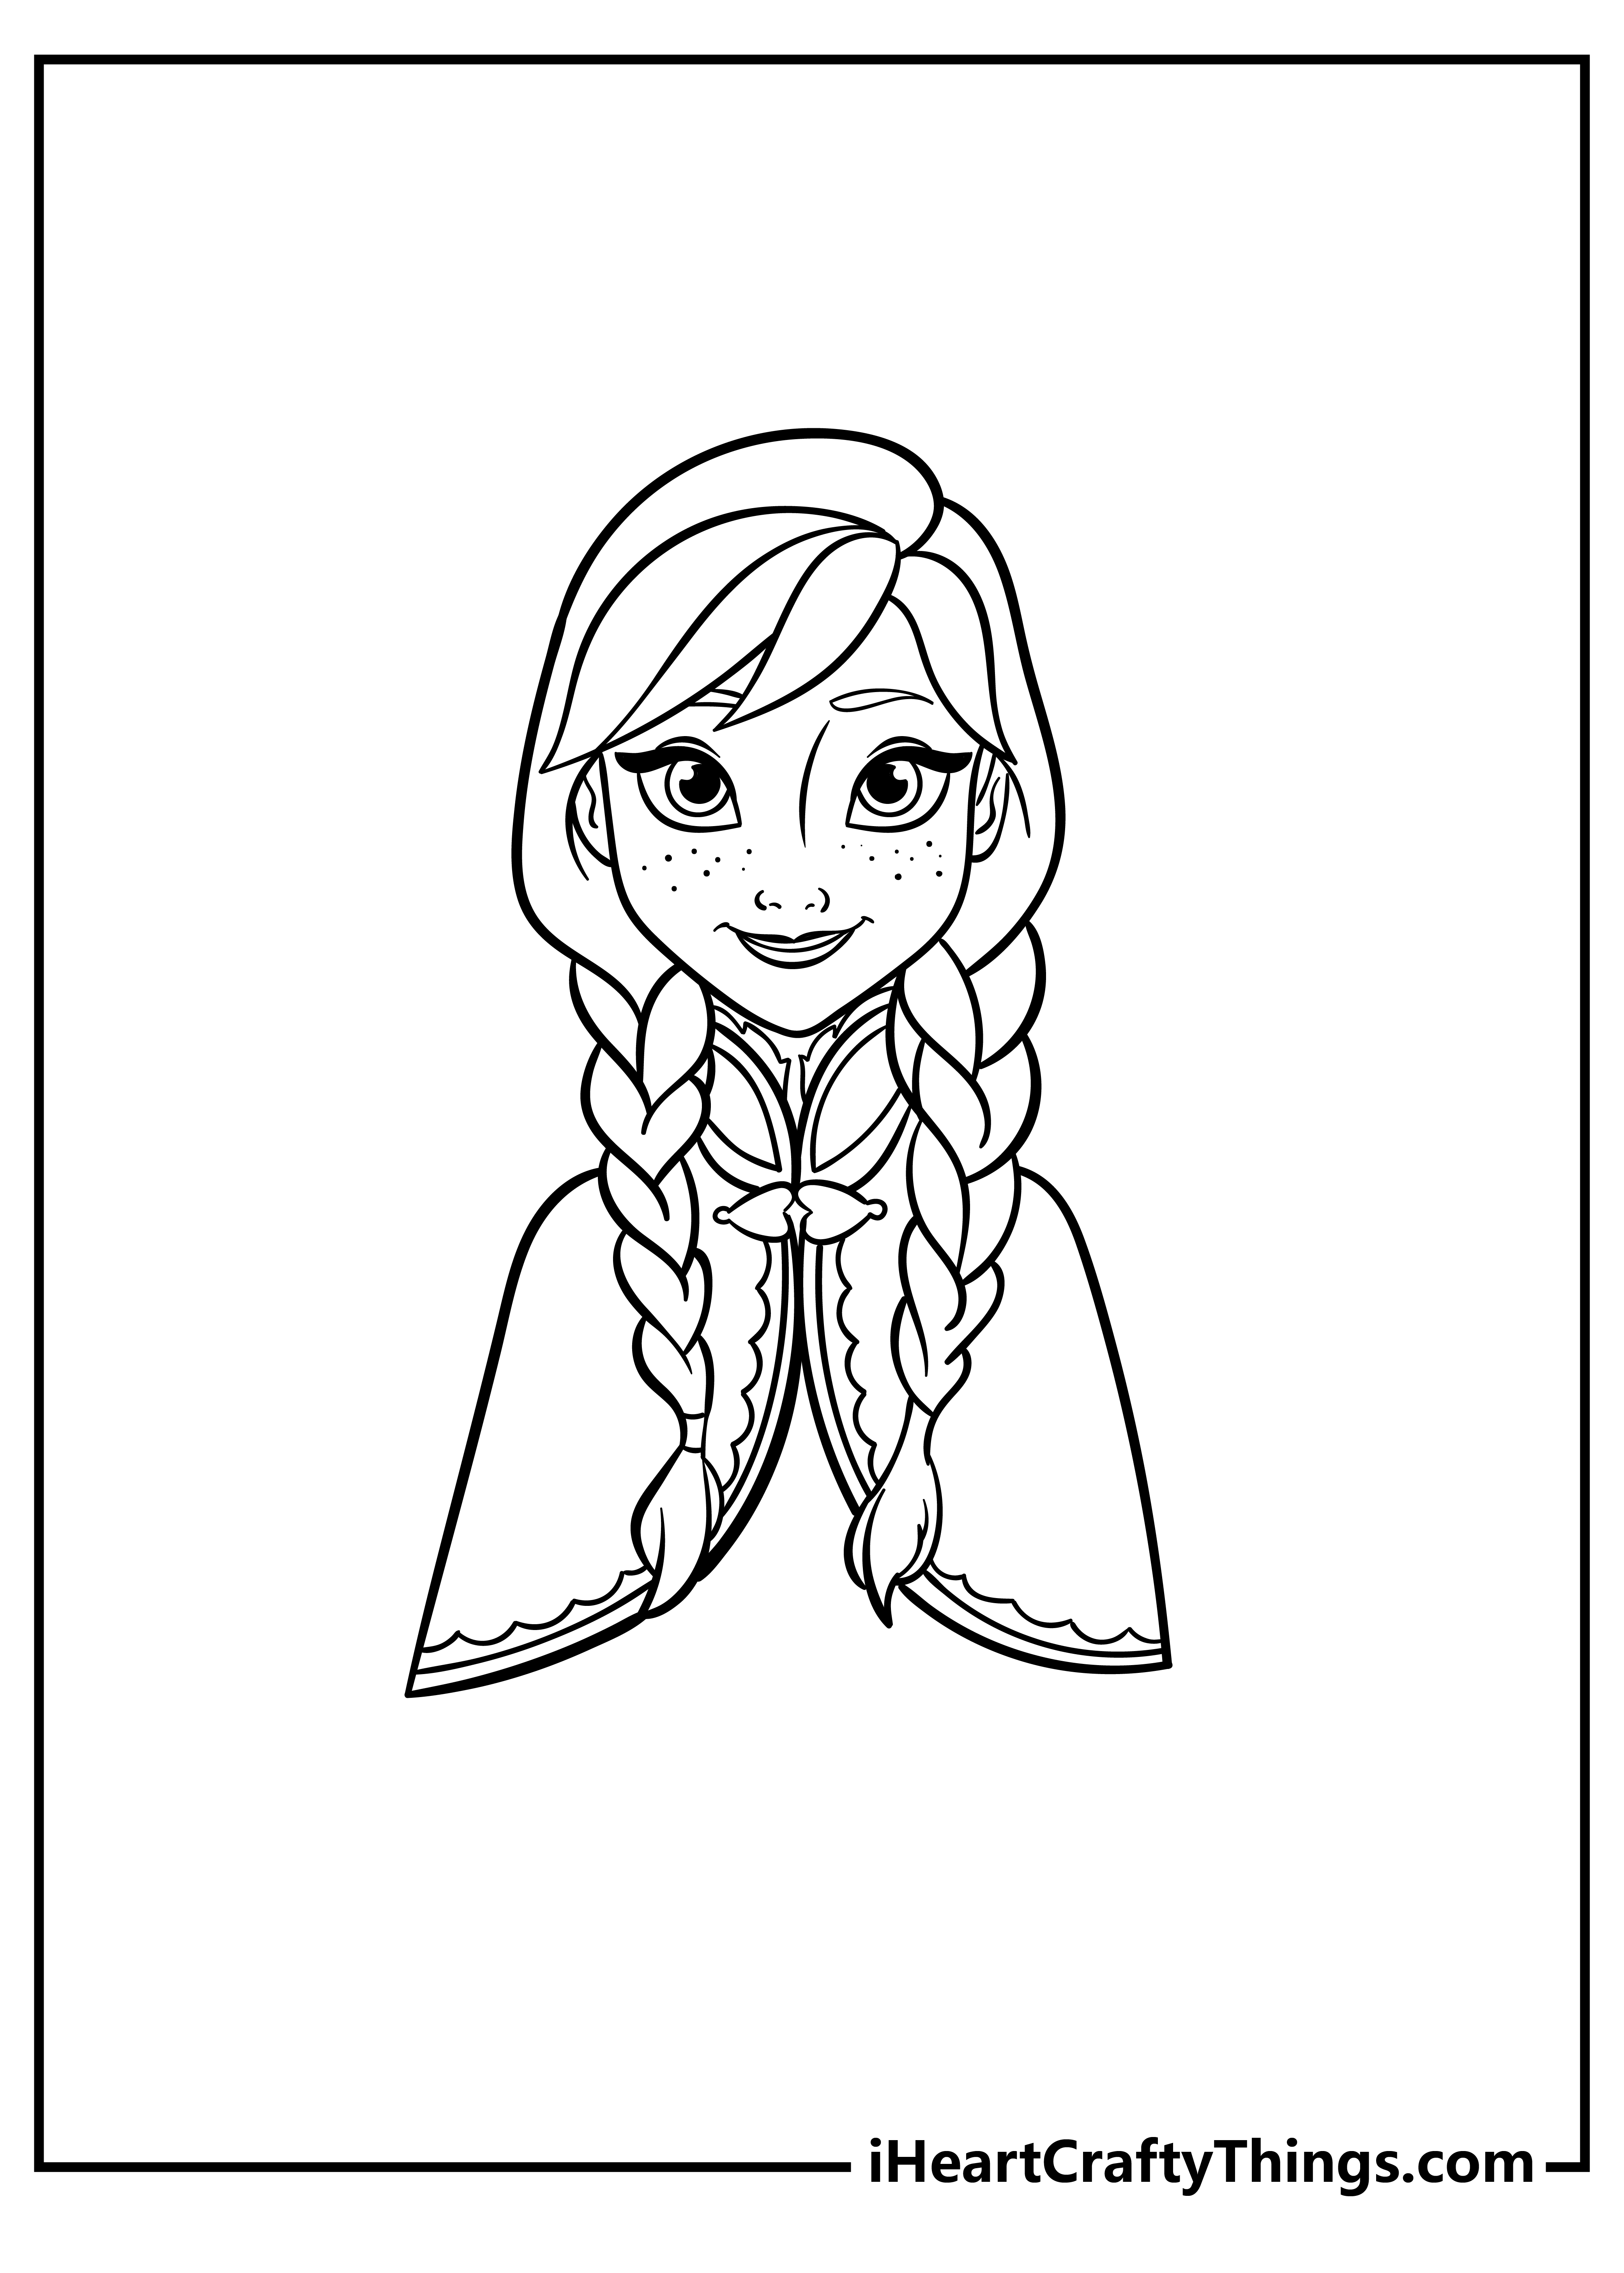 Elsa and Anna Coloring Pages for preschoolers free printable